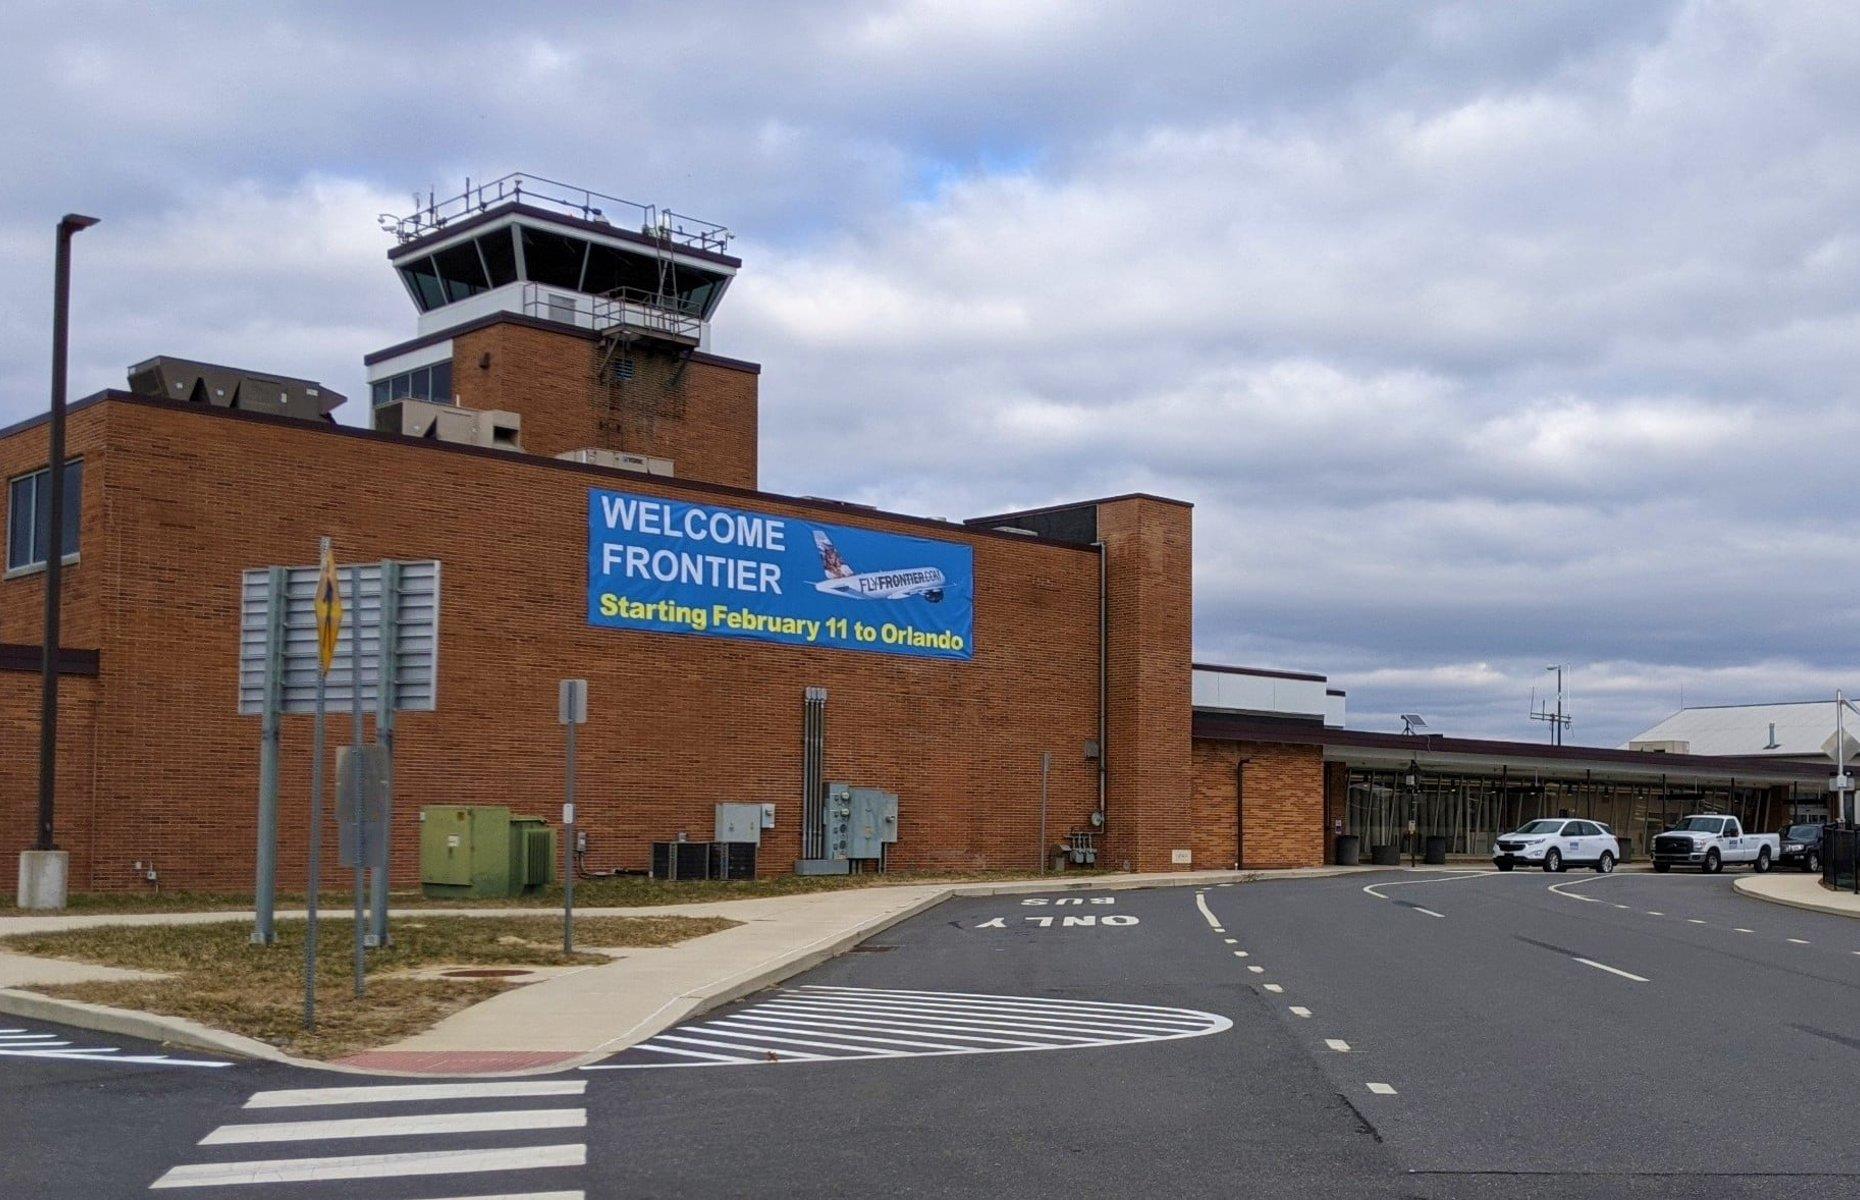 <p>For several years, Delaware didn’t have a single commercial airport, since Frontier halted flights to <a href="https://flyilg.com/">Wilmington Airport</a> (also known as New Castle Airport) in 2015. Thankfully for those wishing to avoid the hassle of busier transport hubs, the airline restarted flights in February 2021. It was also announced last year that <a href="https://delawarebusinesstimes.com/news/new-castle-airport-upgrade/">the airport would be getting more federal funding</a>. As you’d expect, it’s pretty small – <a href="https://www.yelp.com/biz/wilmington-international-airport-ilm-wilmington">one recent traveler exclaimed</a> “this airport is one of the smallest I’ve ever been in” – but it’s also extremely easy to navigate.</p>